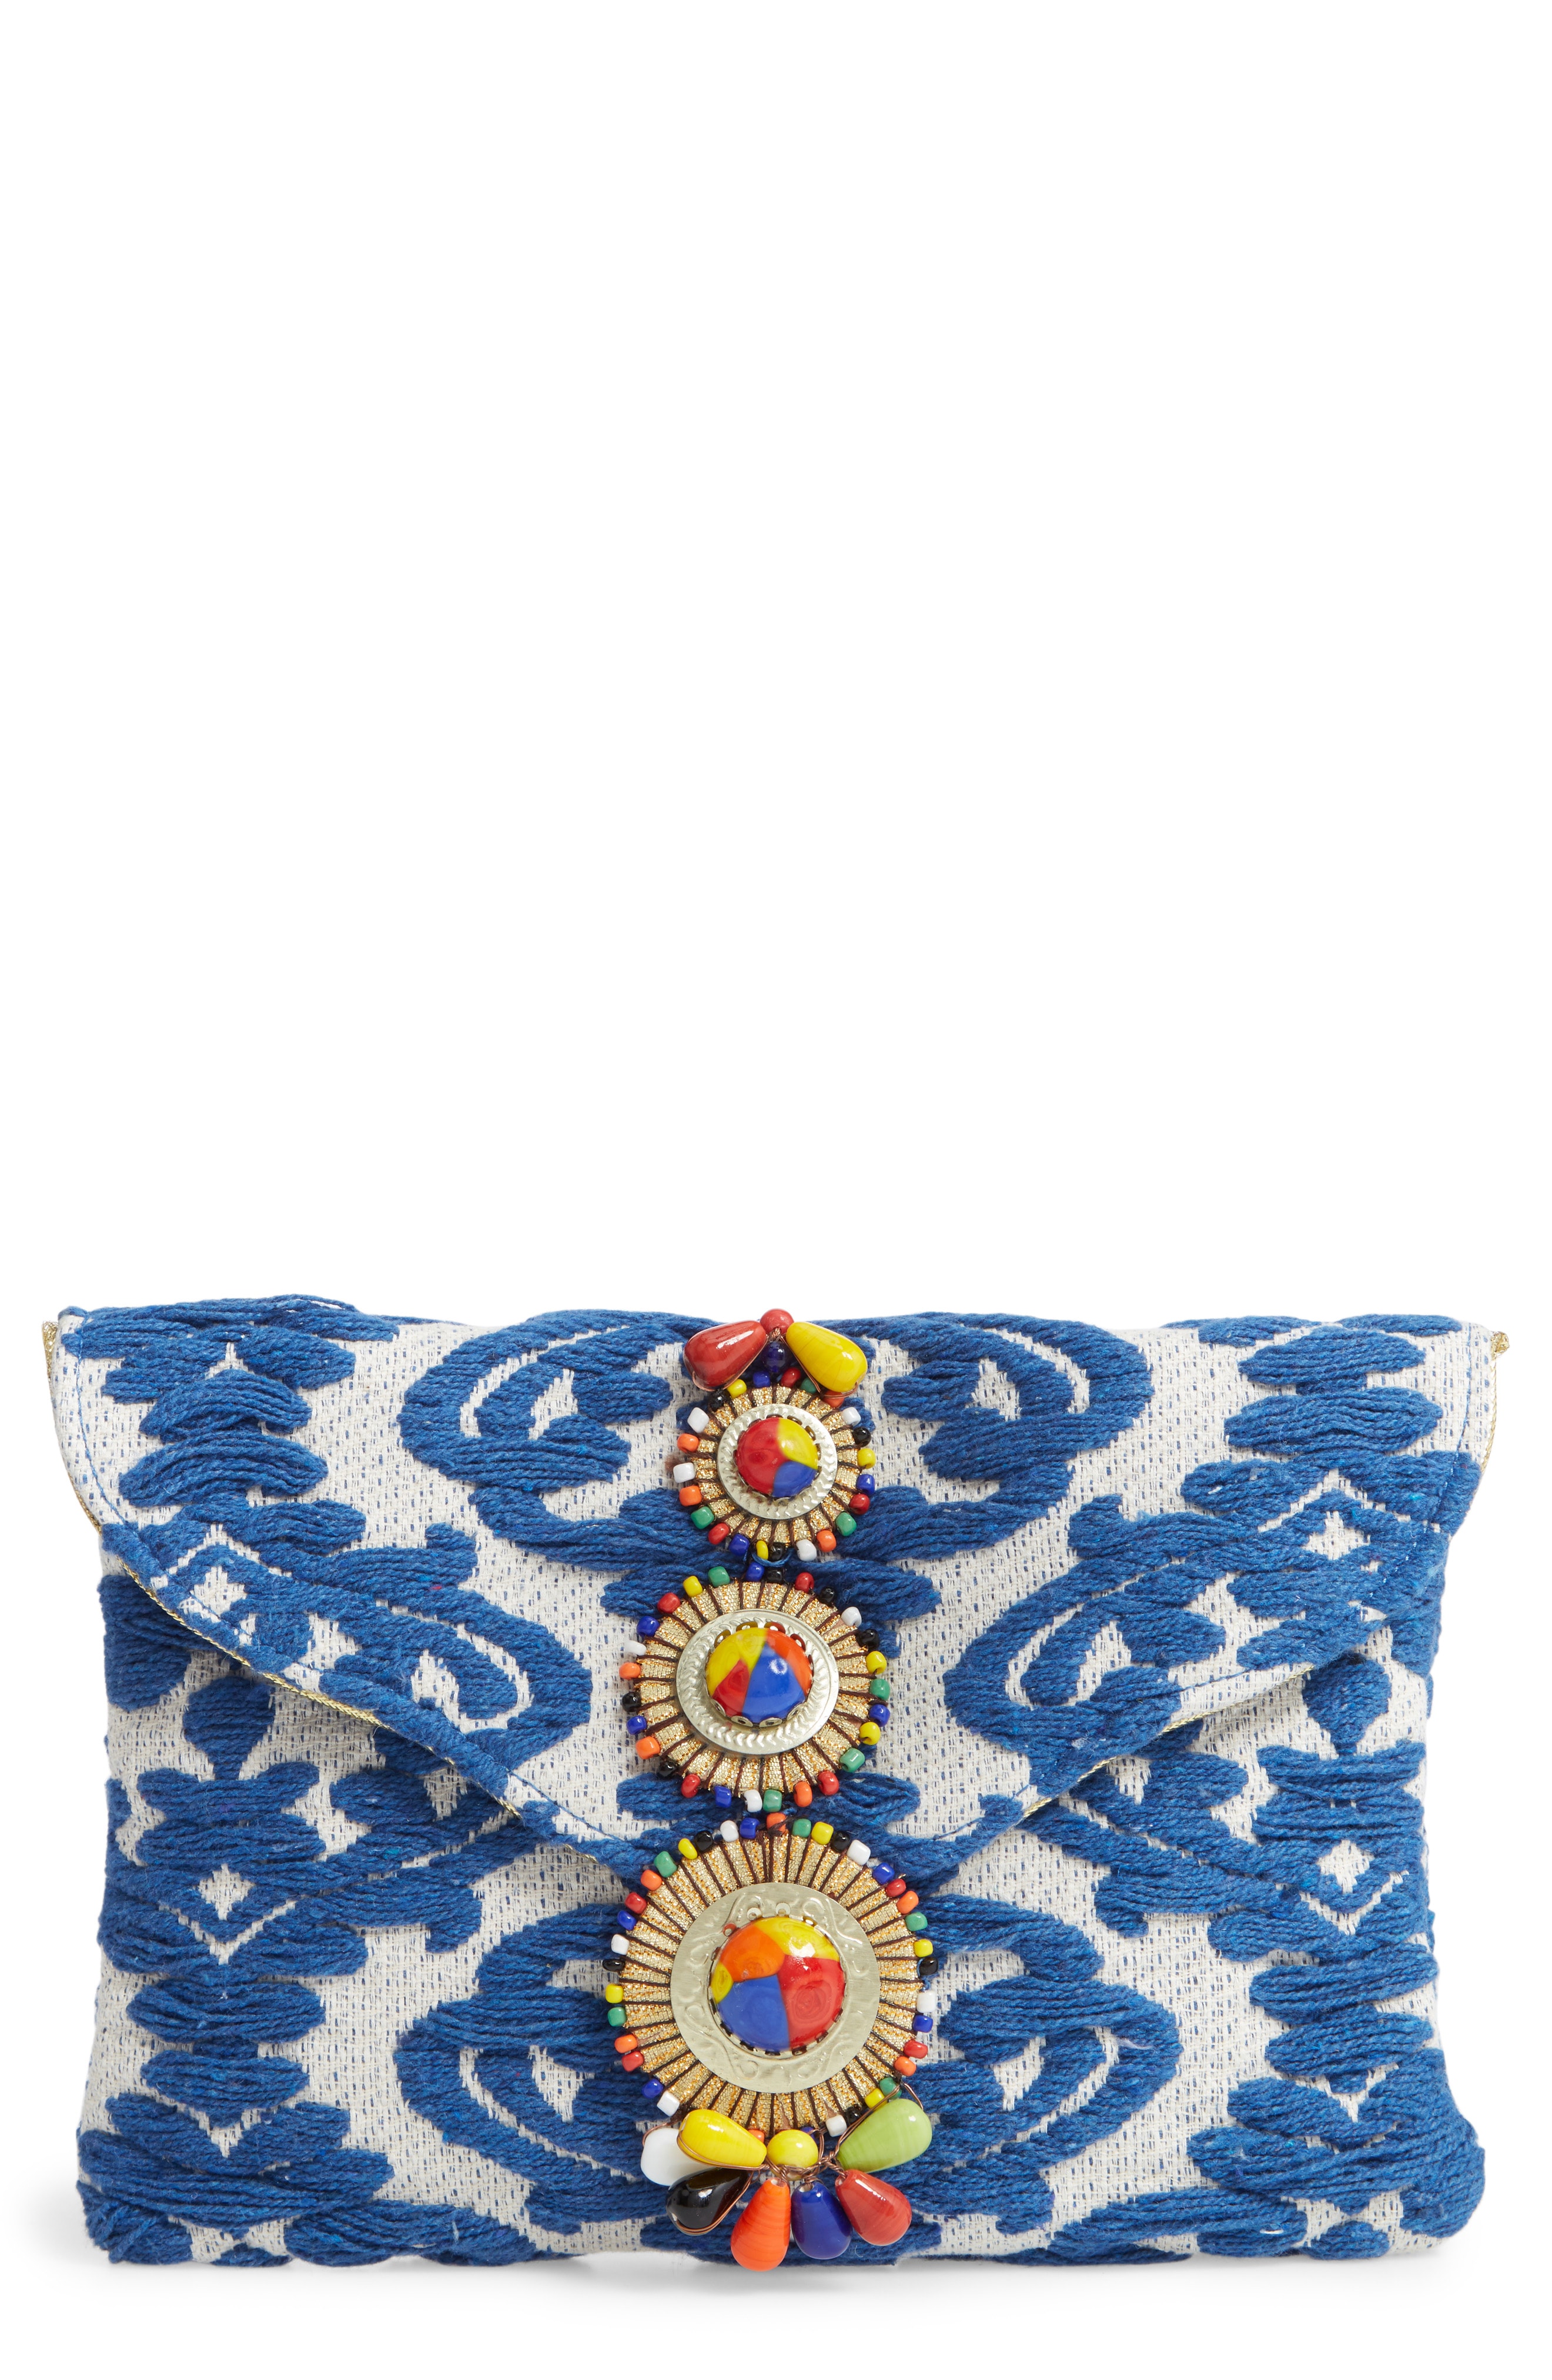 Steven by Steve Madden Beaded & Embroidered Clutch